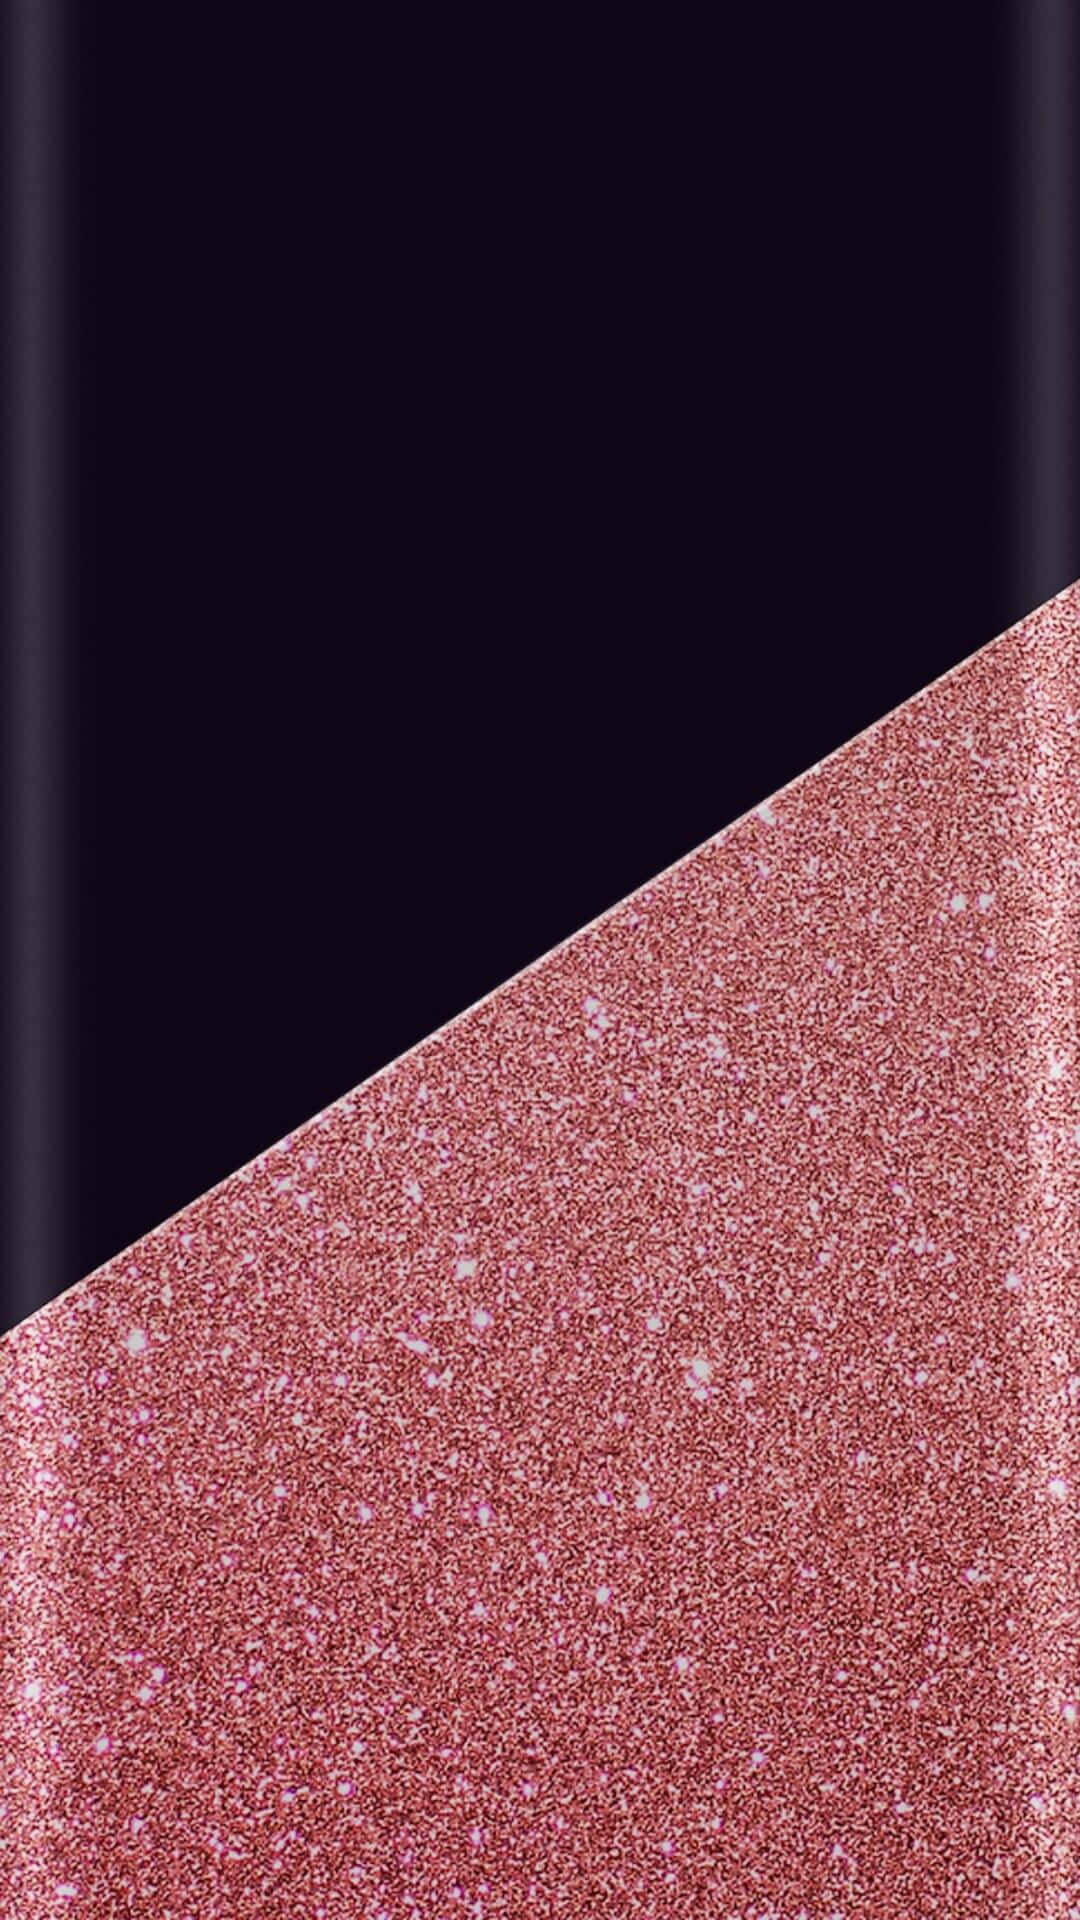 Black And Pink Glittery iPhone Wallpaper